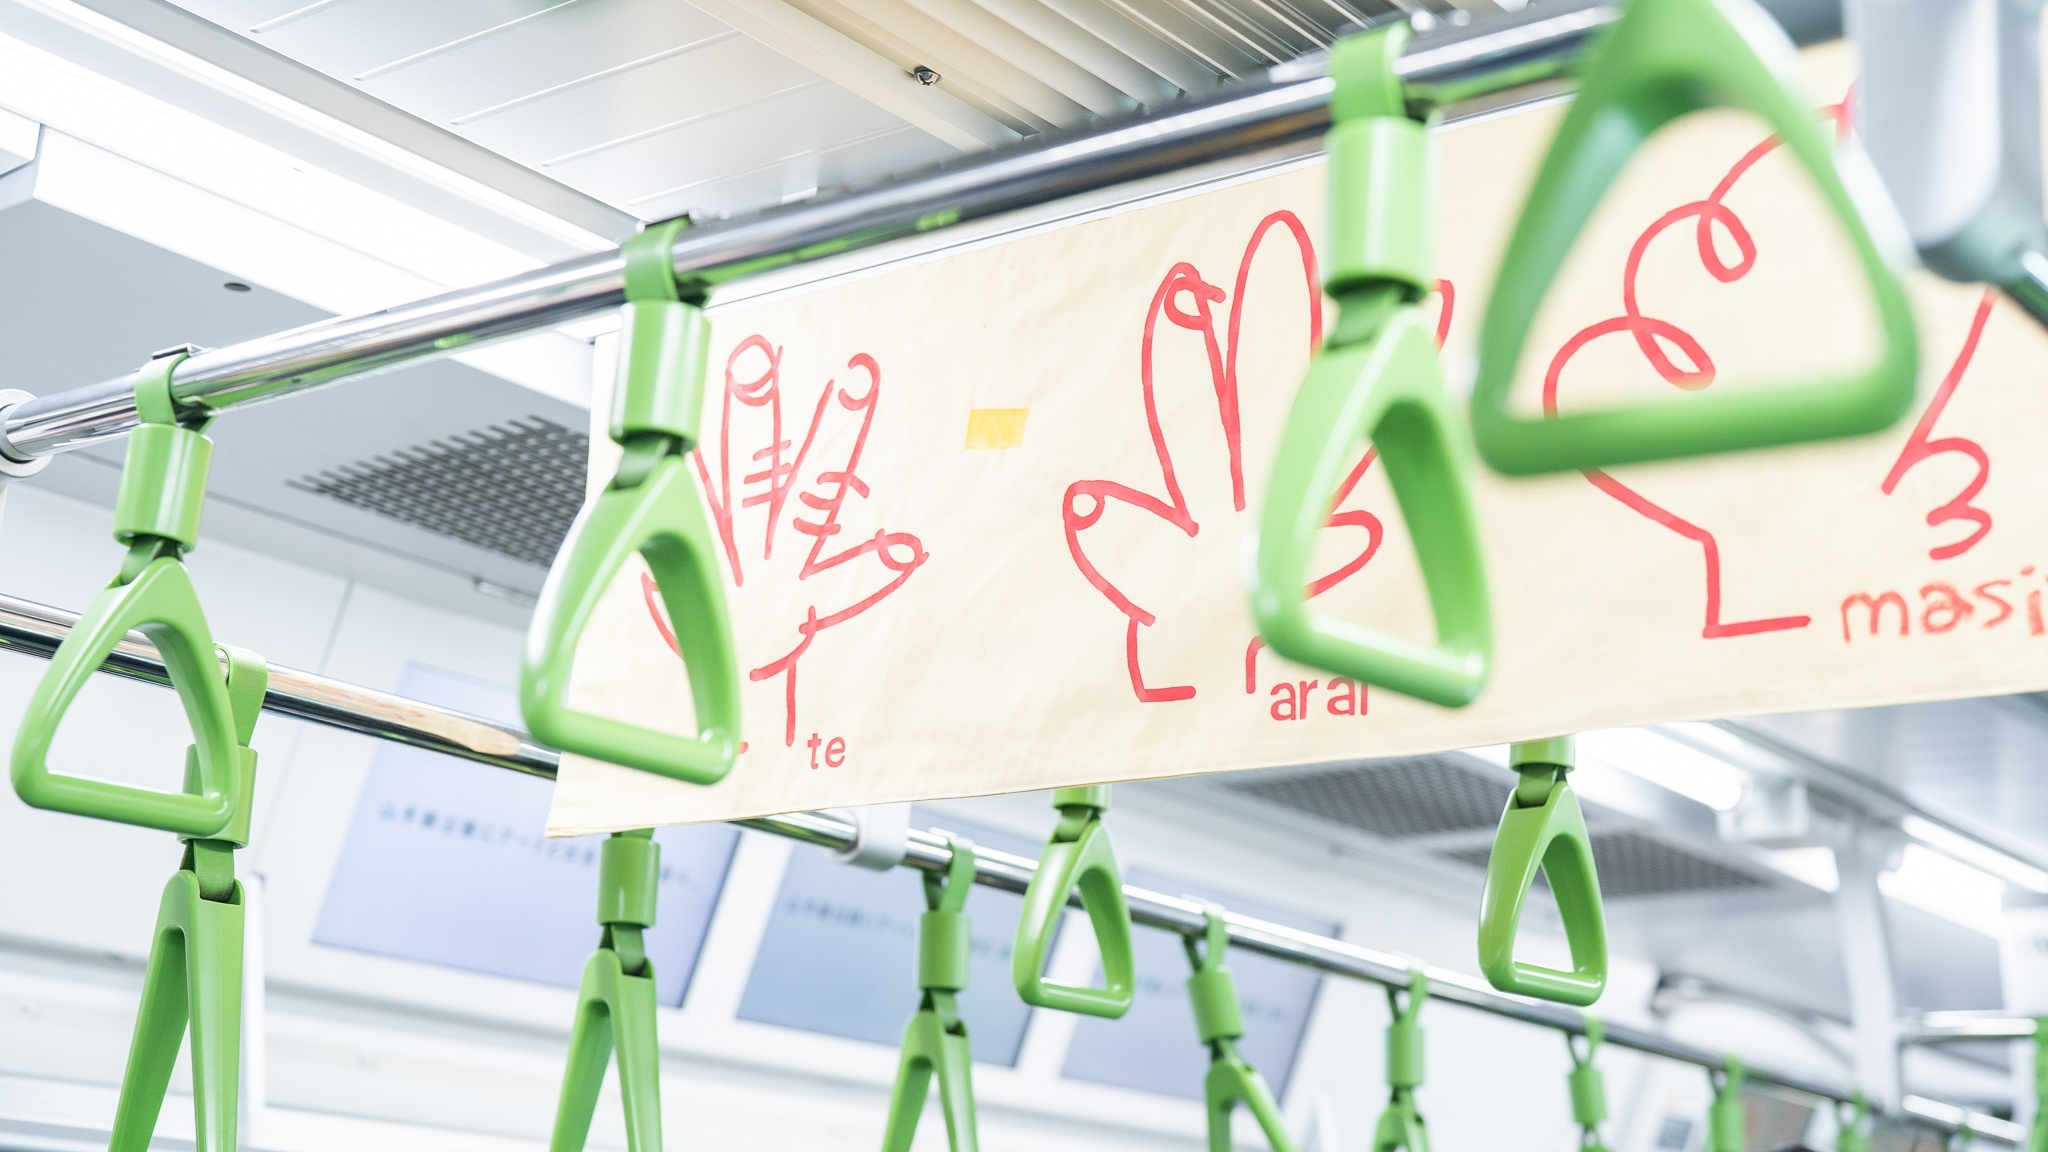 MELTedMEADOW YAMANOTE LINE MUSEUM